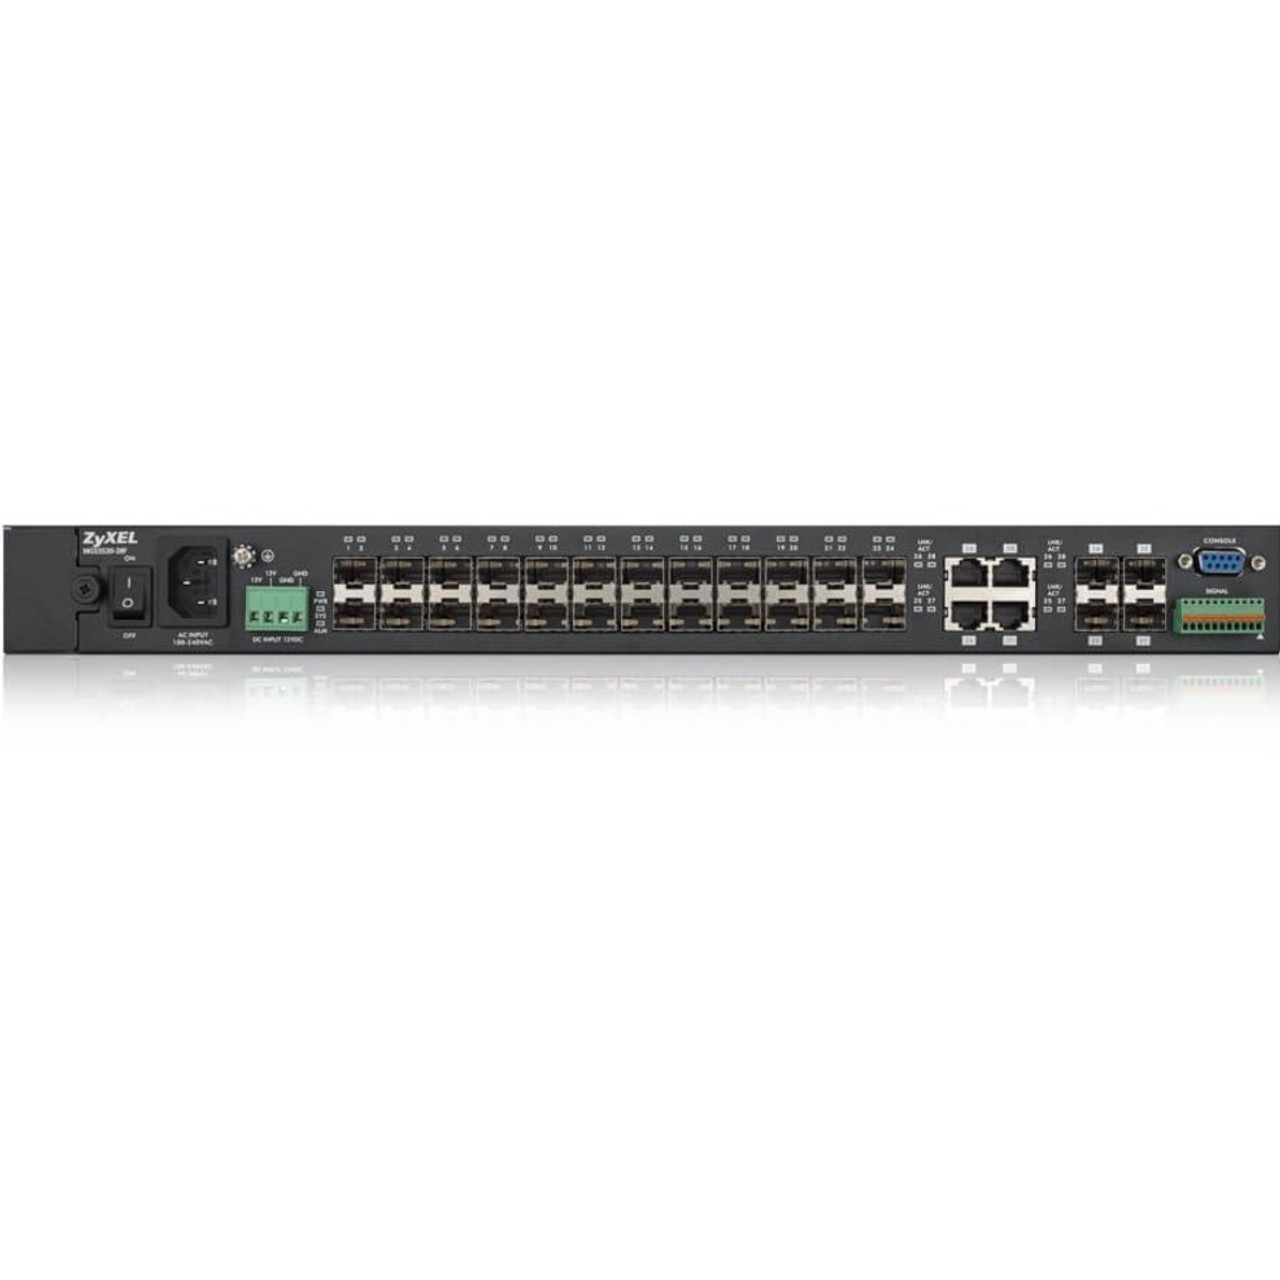 ZYXEL Telco-Class Layer 2 Gigabit Carrier Ethernet Switch